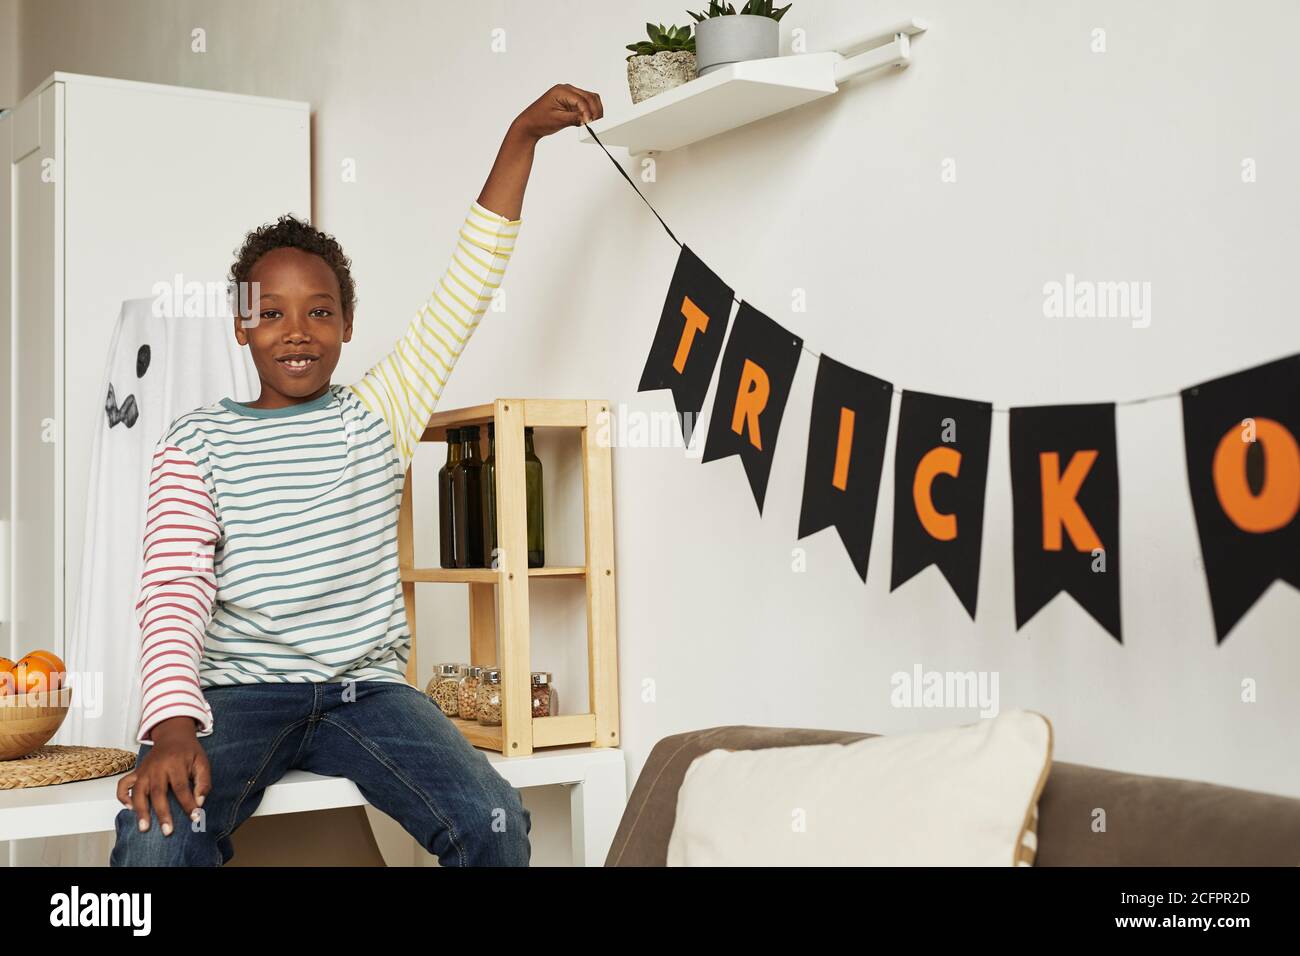 Cheerful African American boy wearing casual clothes decorating room for Halloween party, copy space Stock Photo